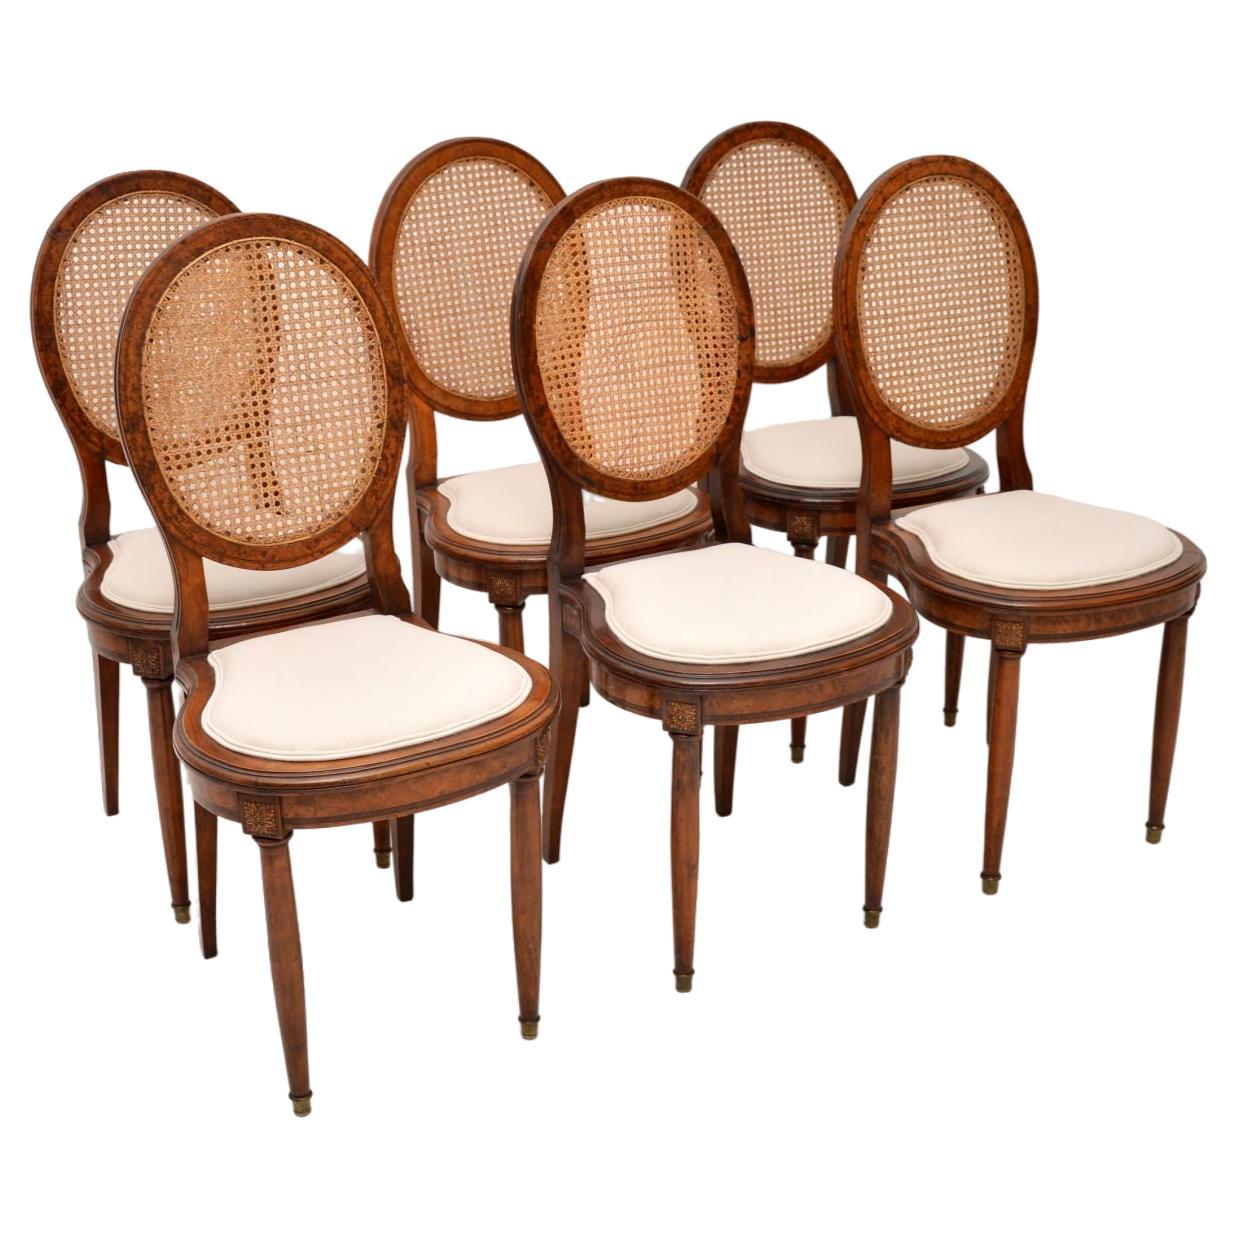 Set of Six Antique French Walnut Cane Back Dining Chairs